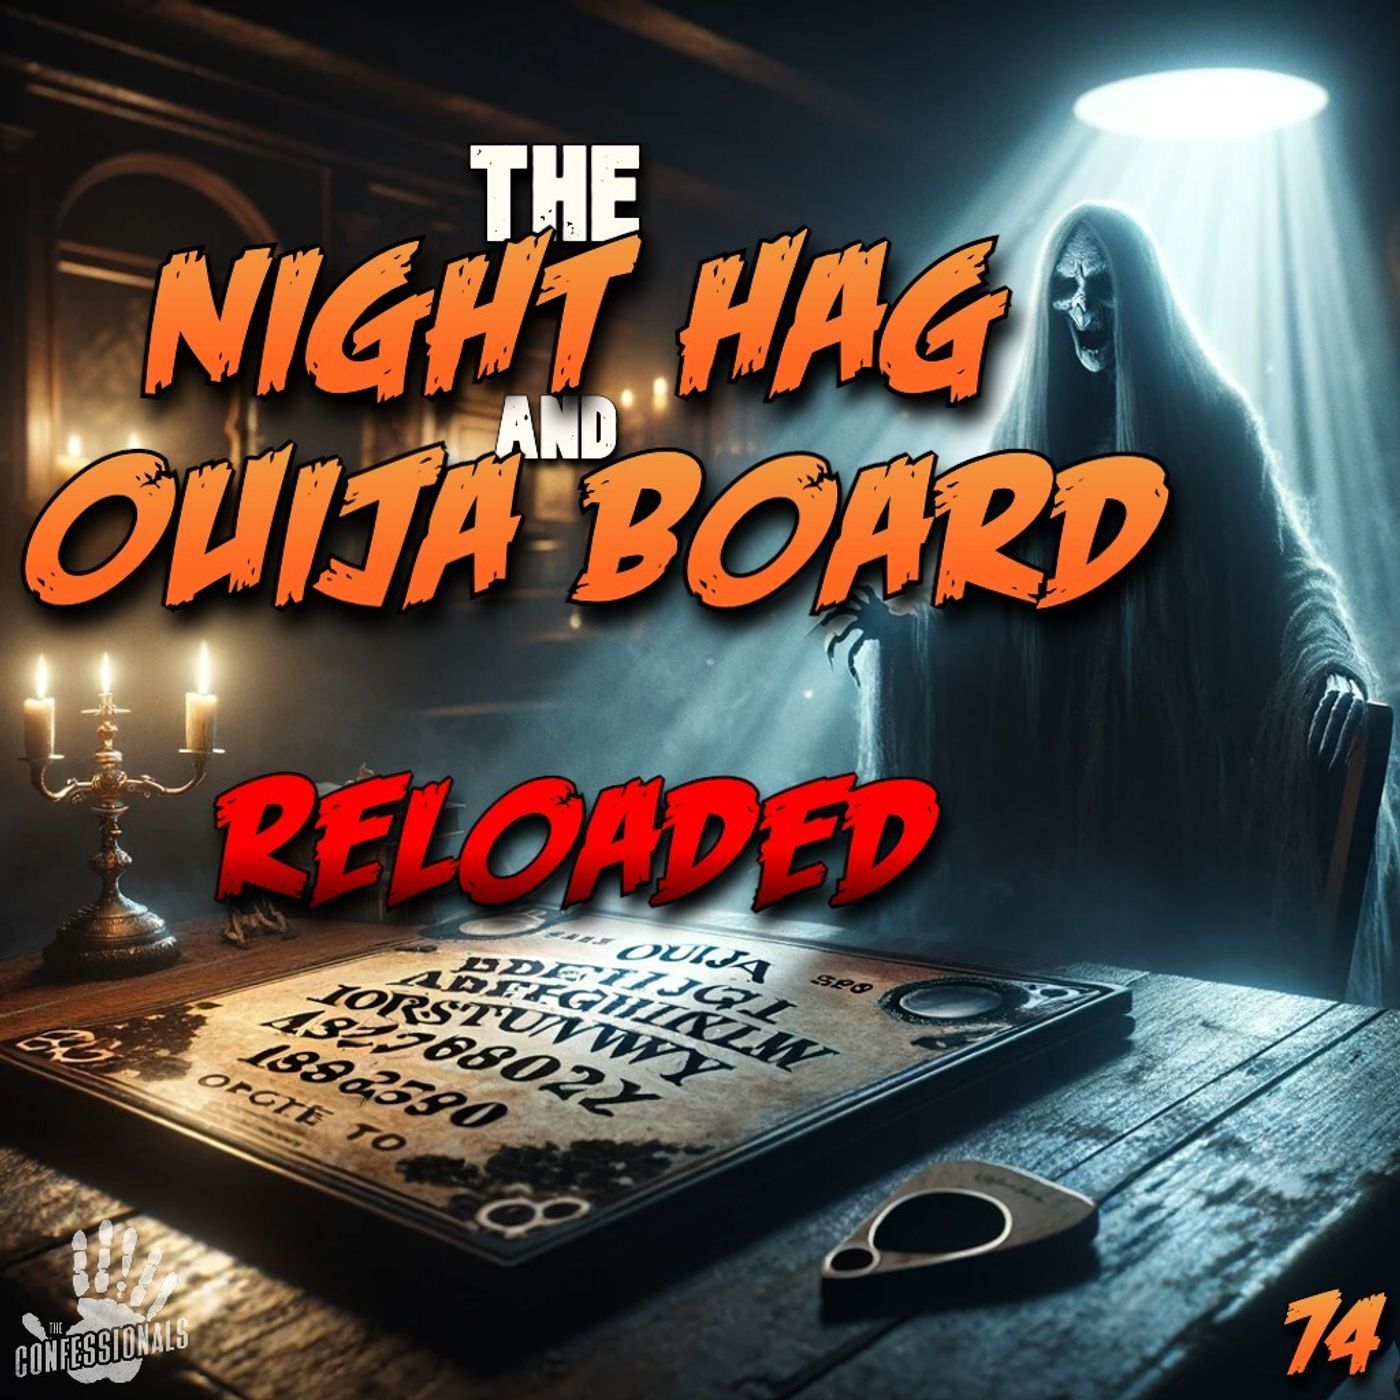 RELOADED | 74: The Night Hag and Ouija Board